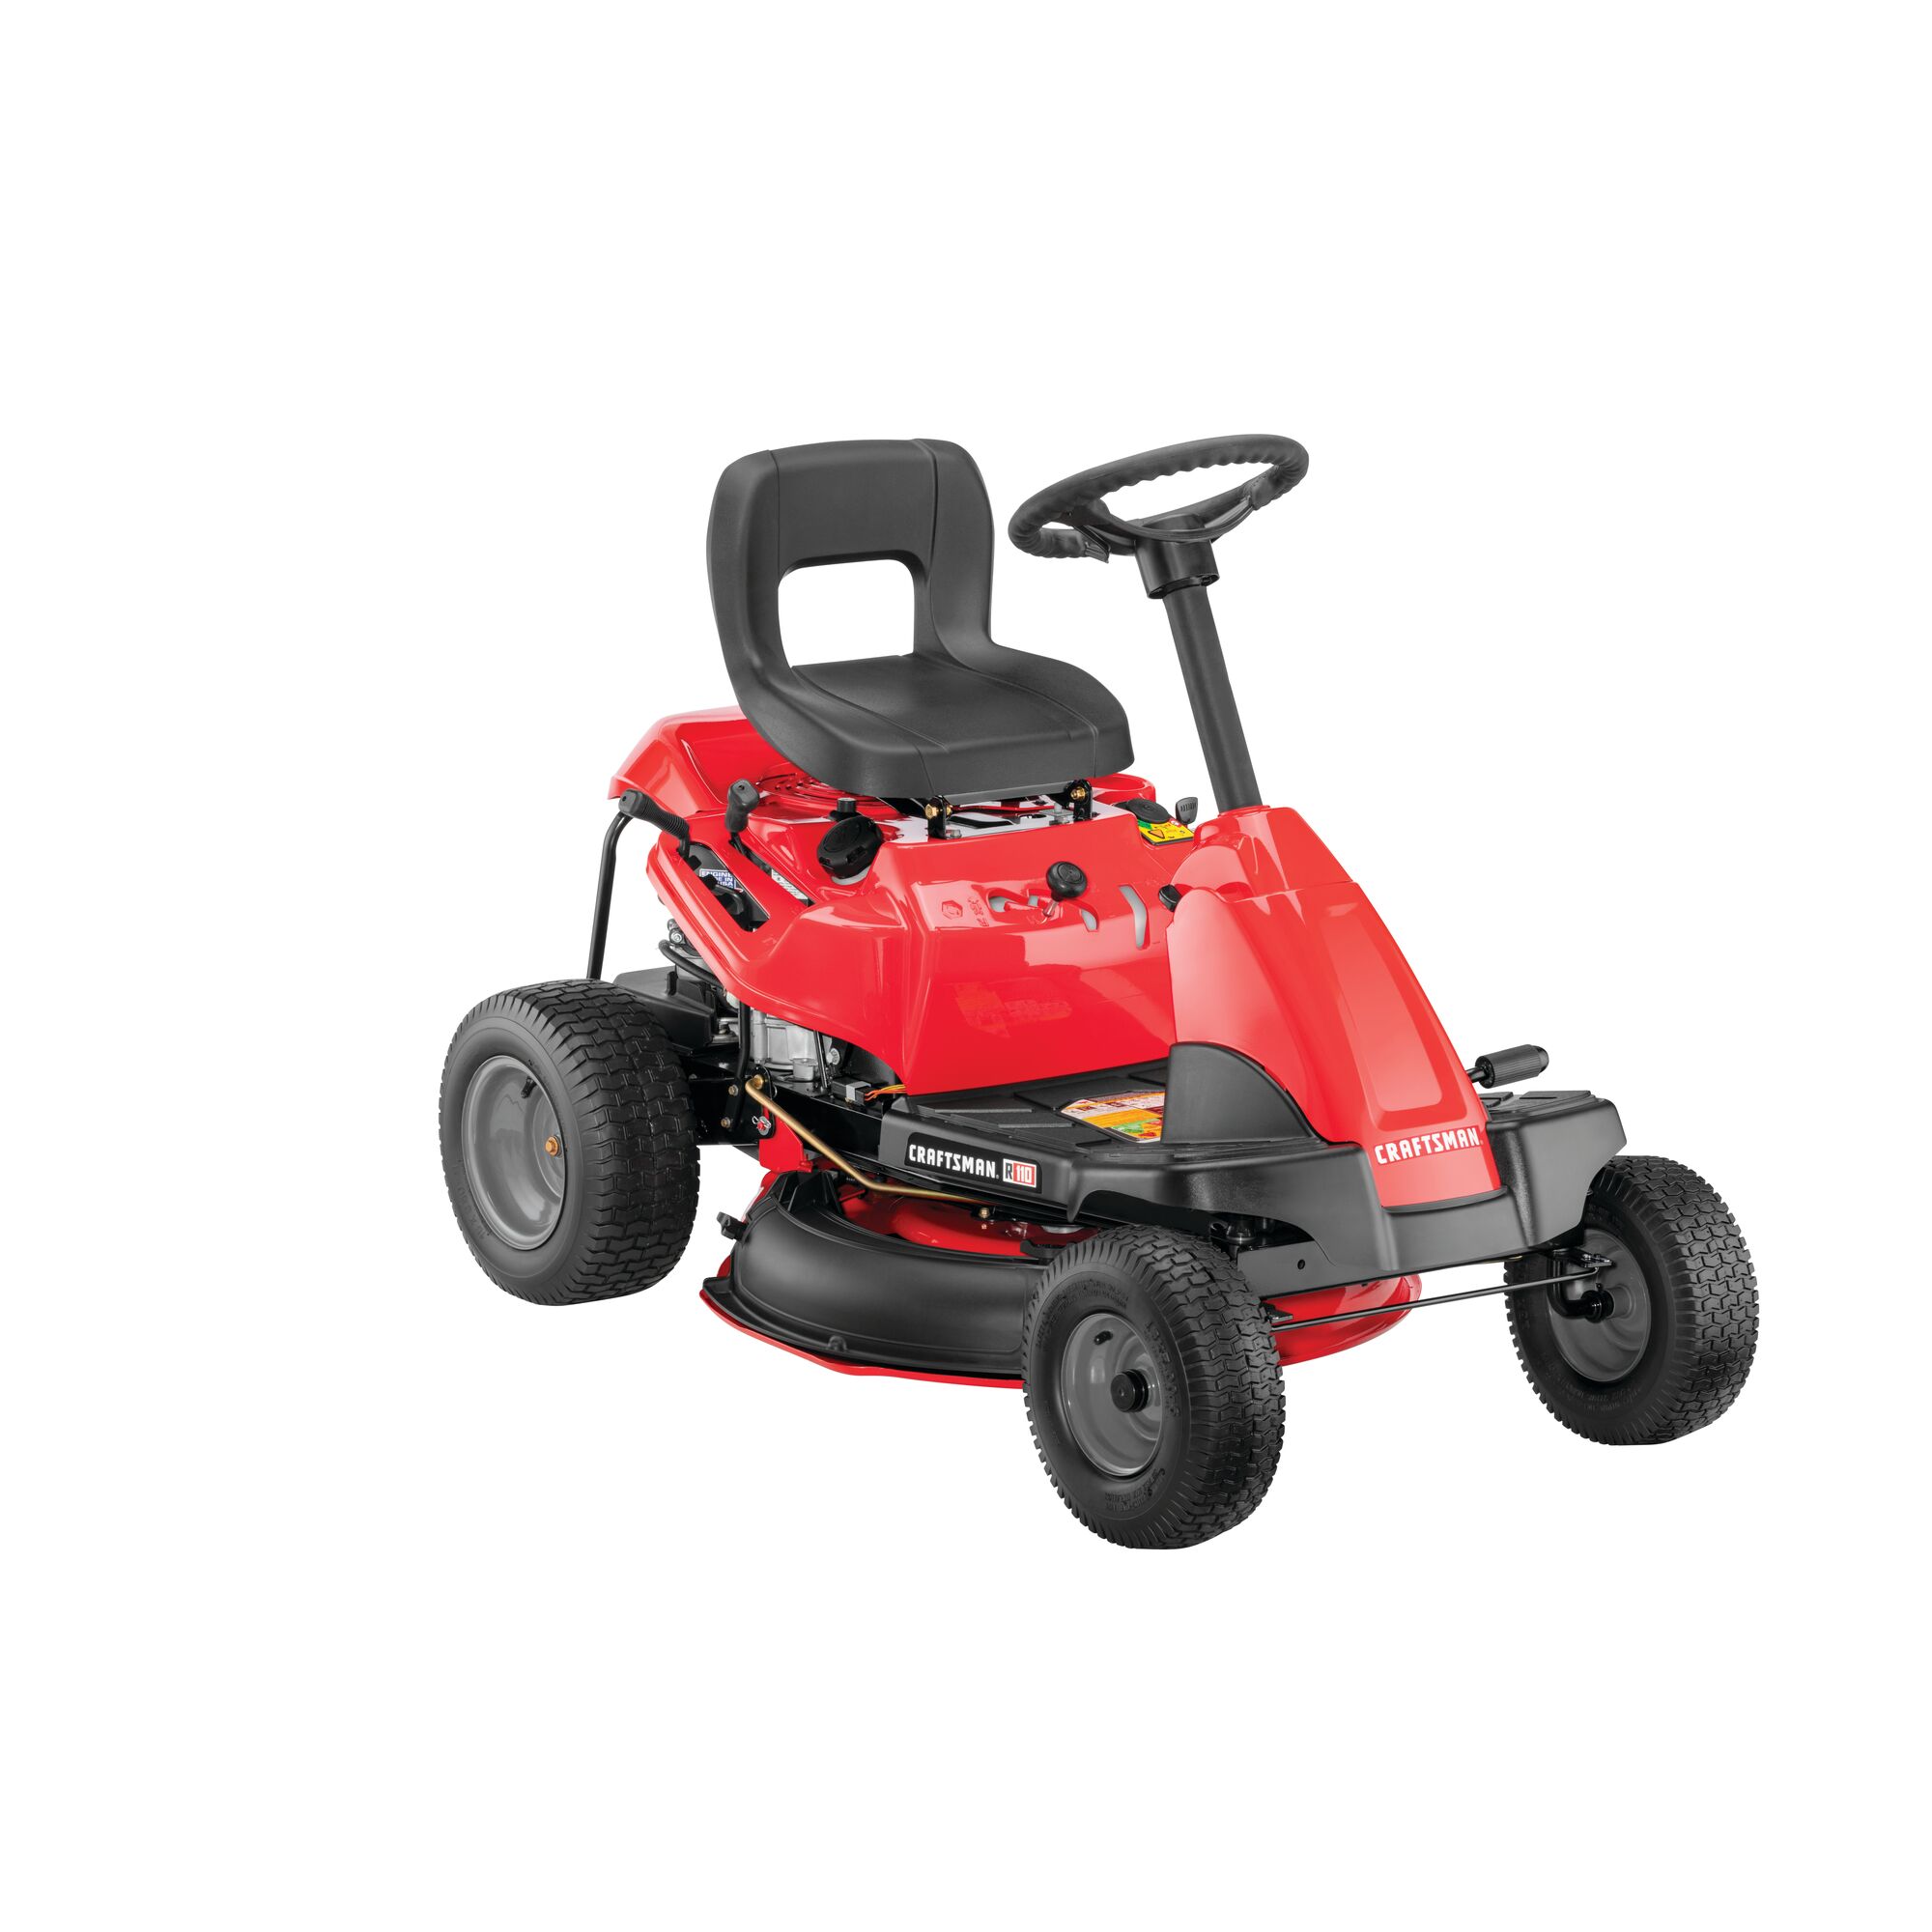 Right profile of 30 inch 10 h p gear drive mini riding mower with mulching kit.